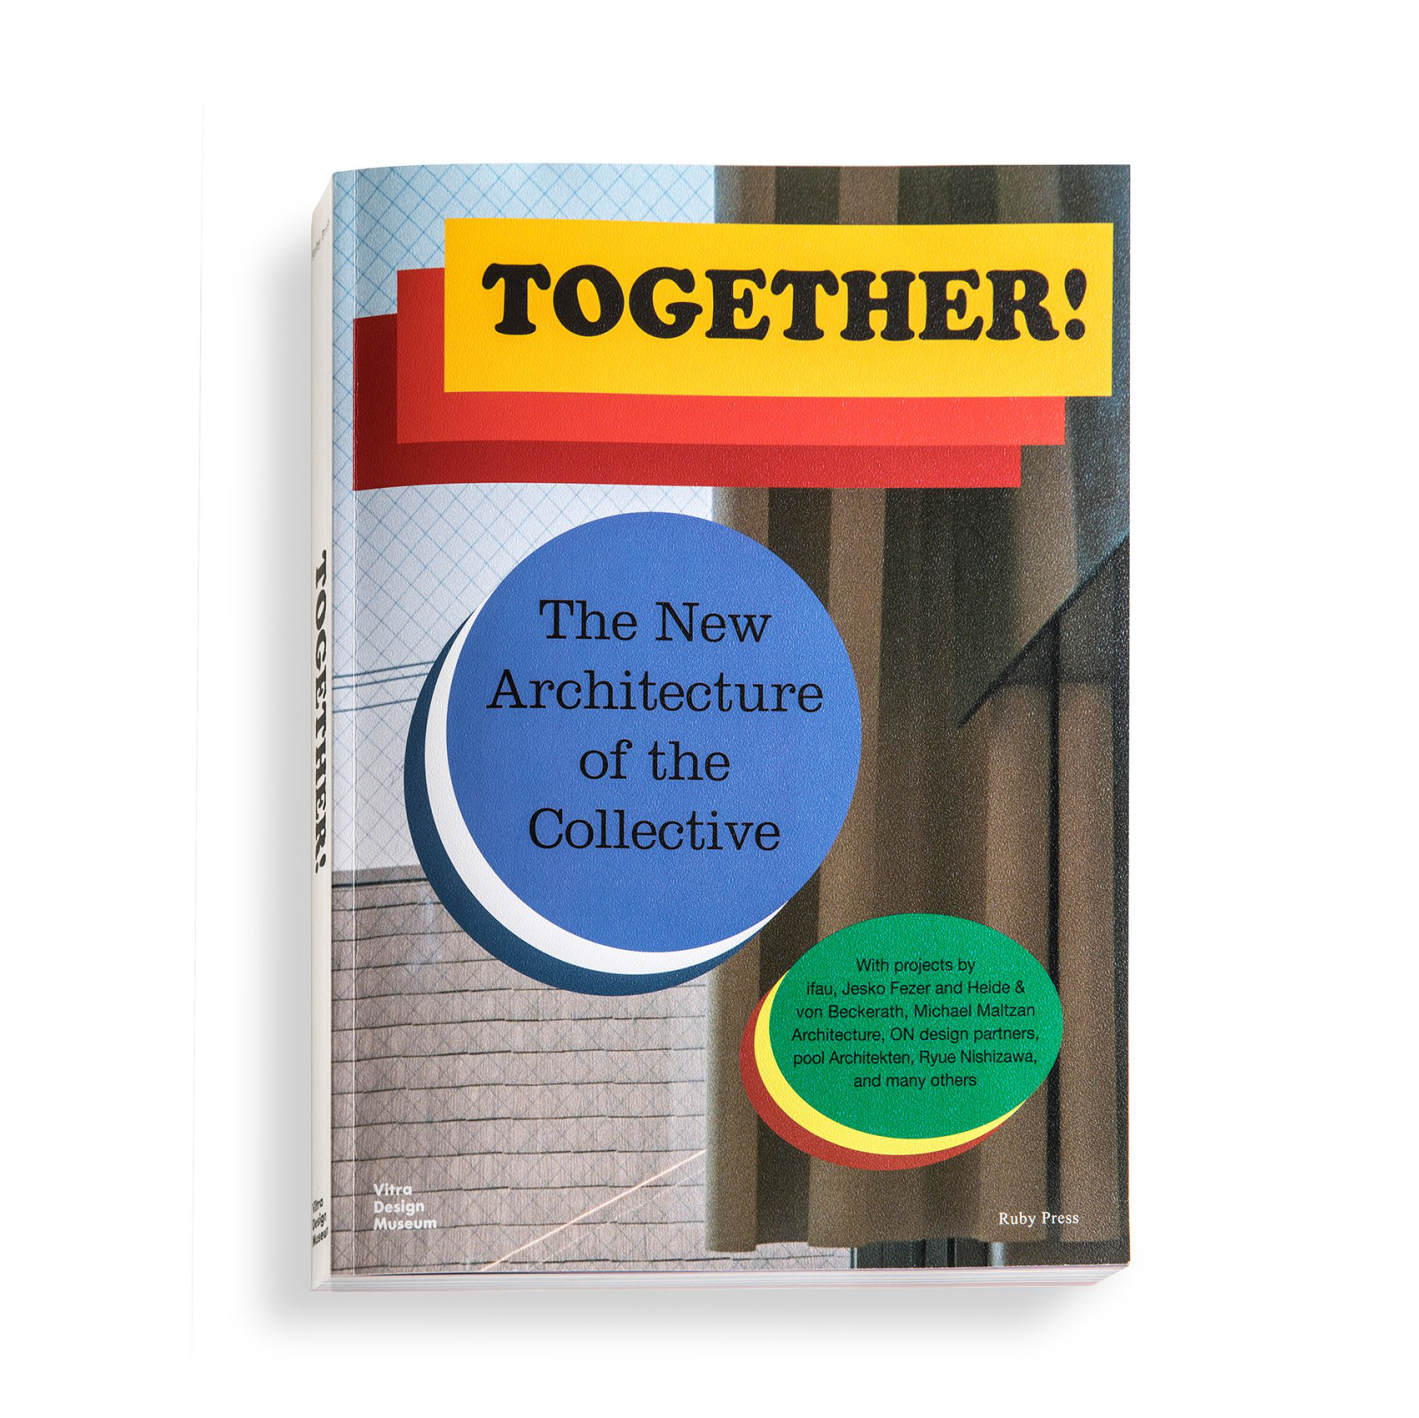 VDM Publication | Together! The New Architecture of the Collective